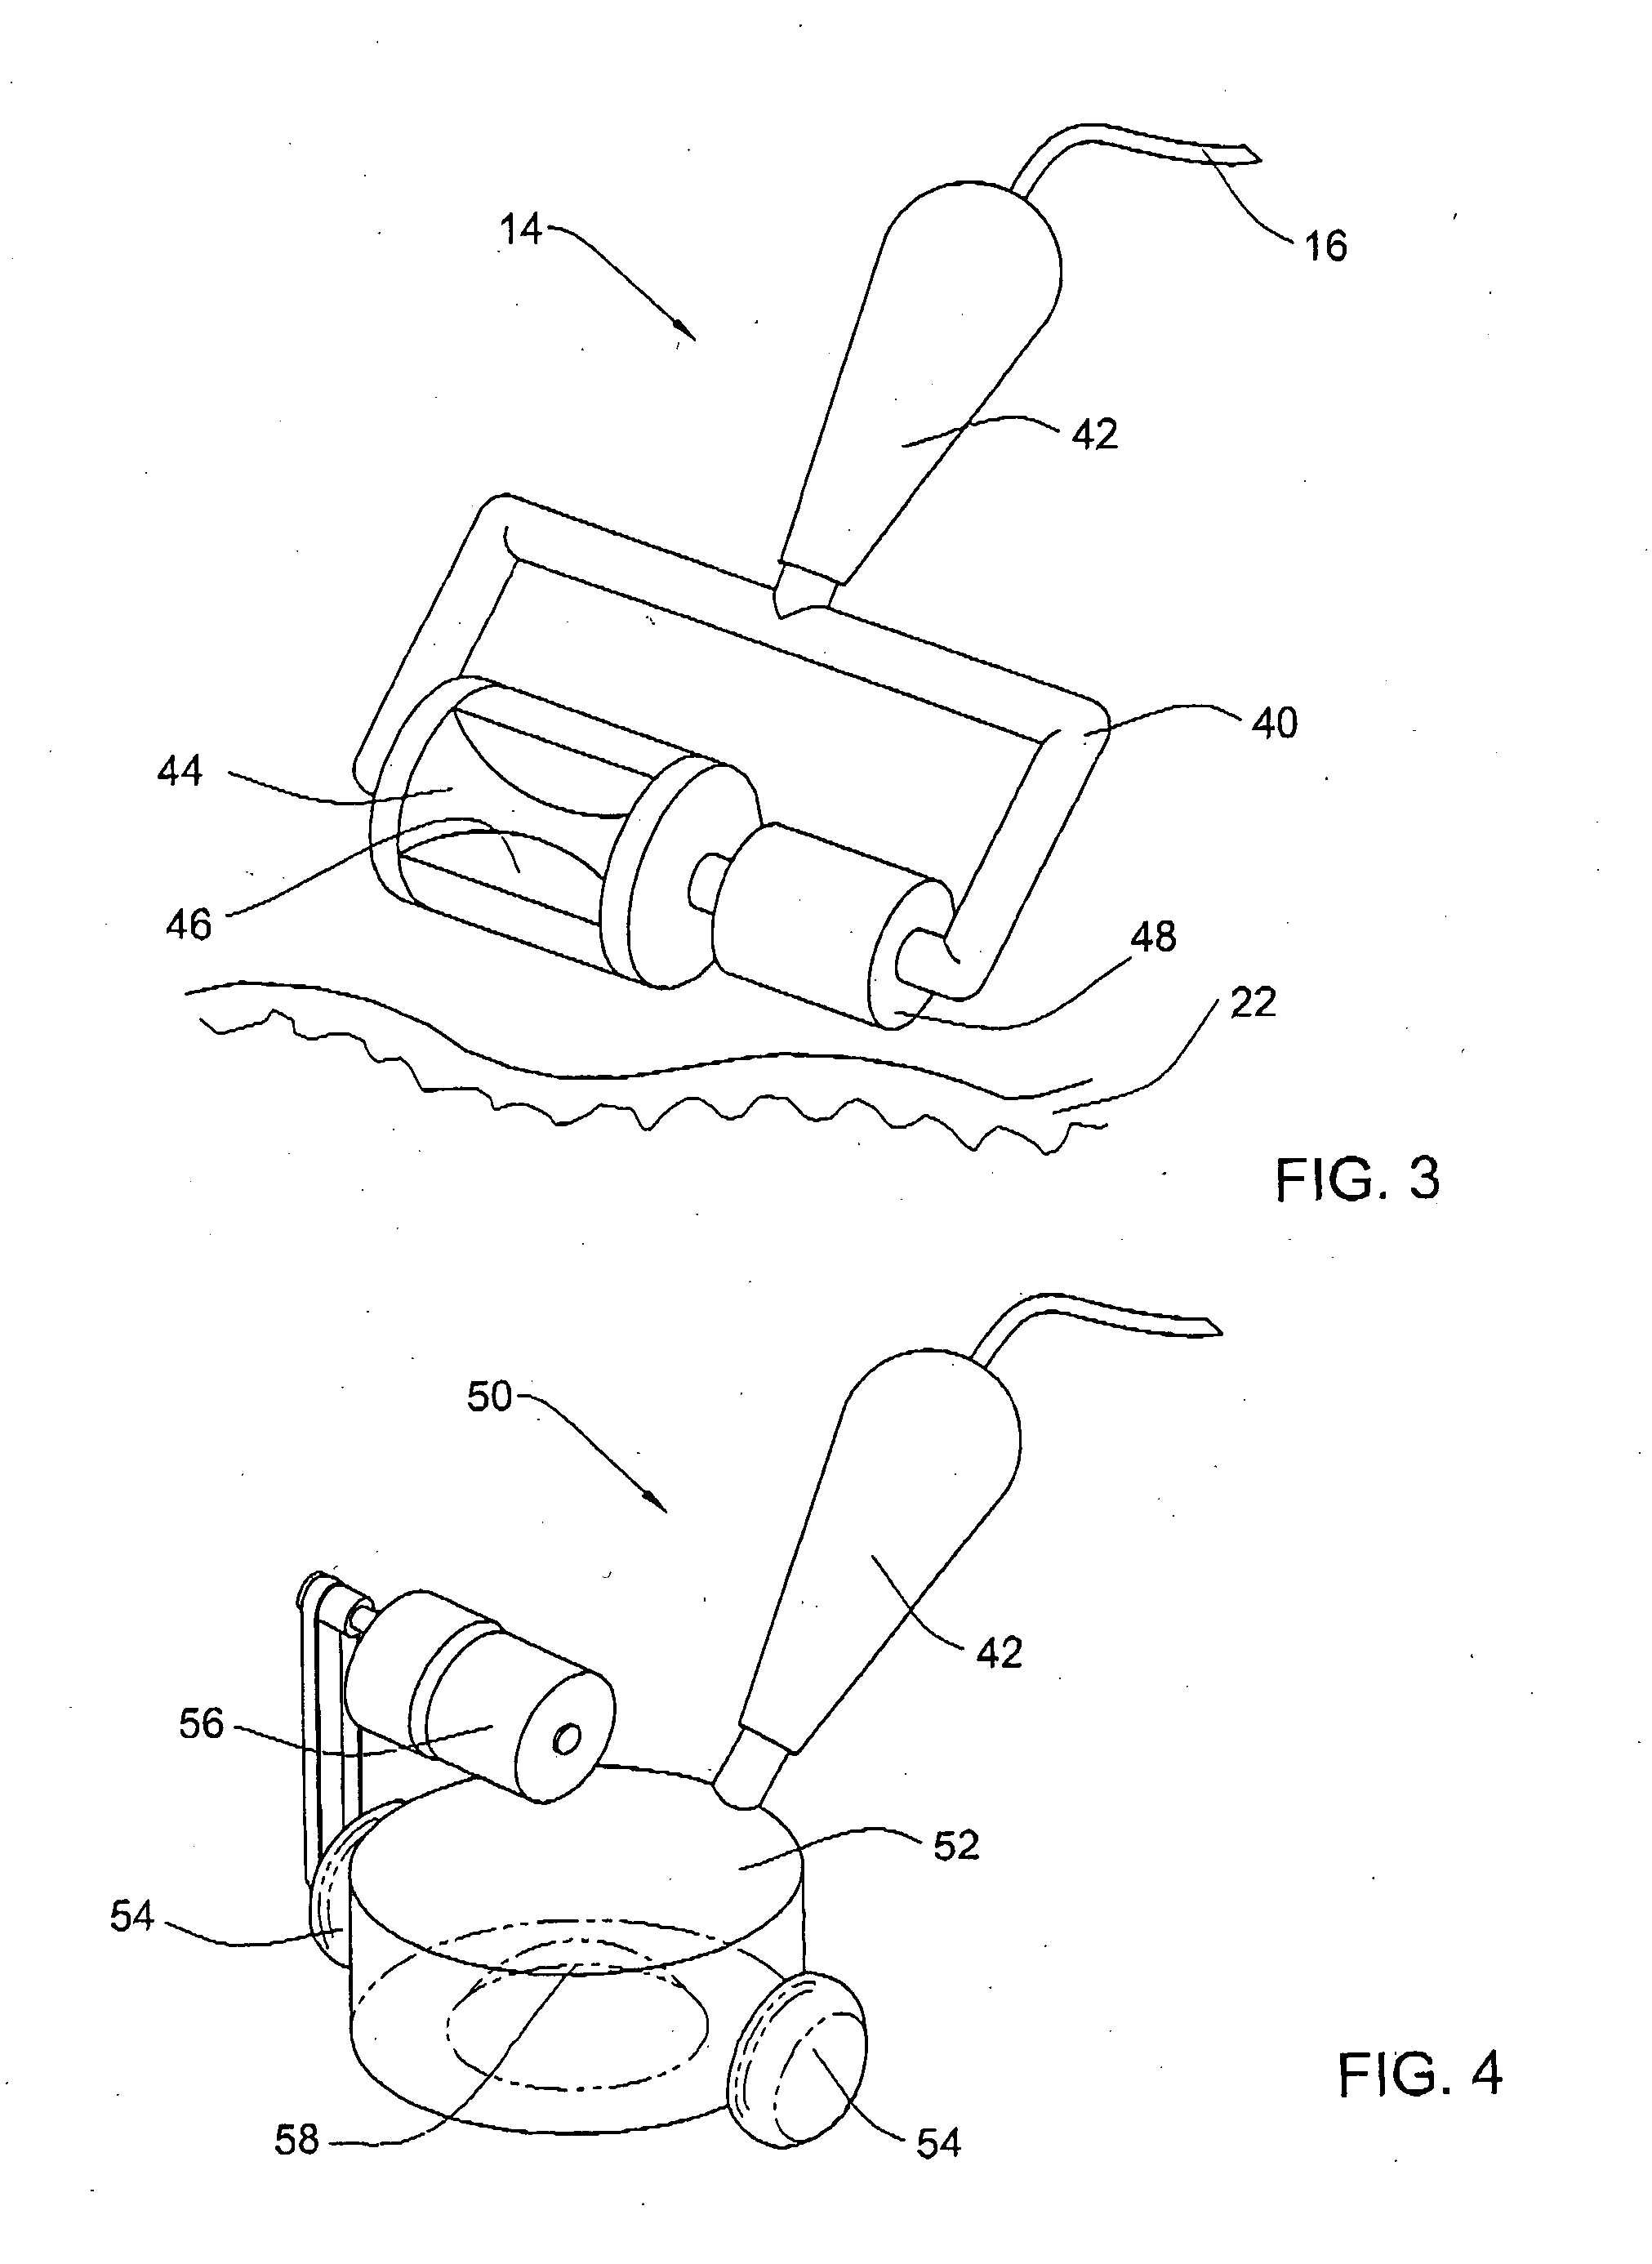 Method and device for sub-dermal tissue treatment